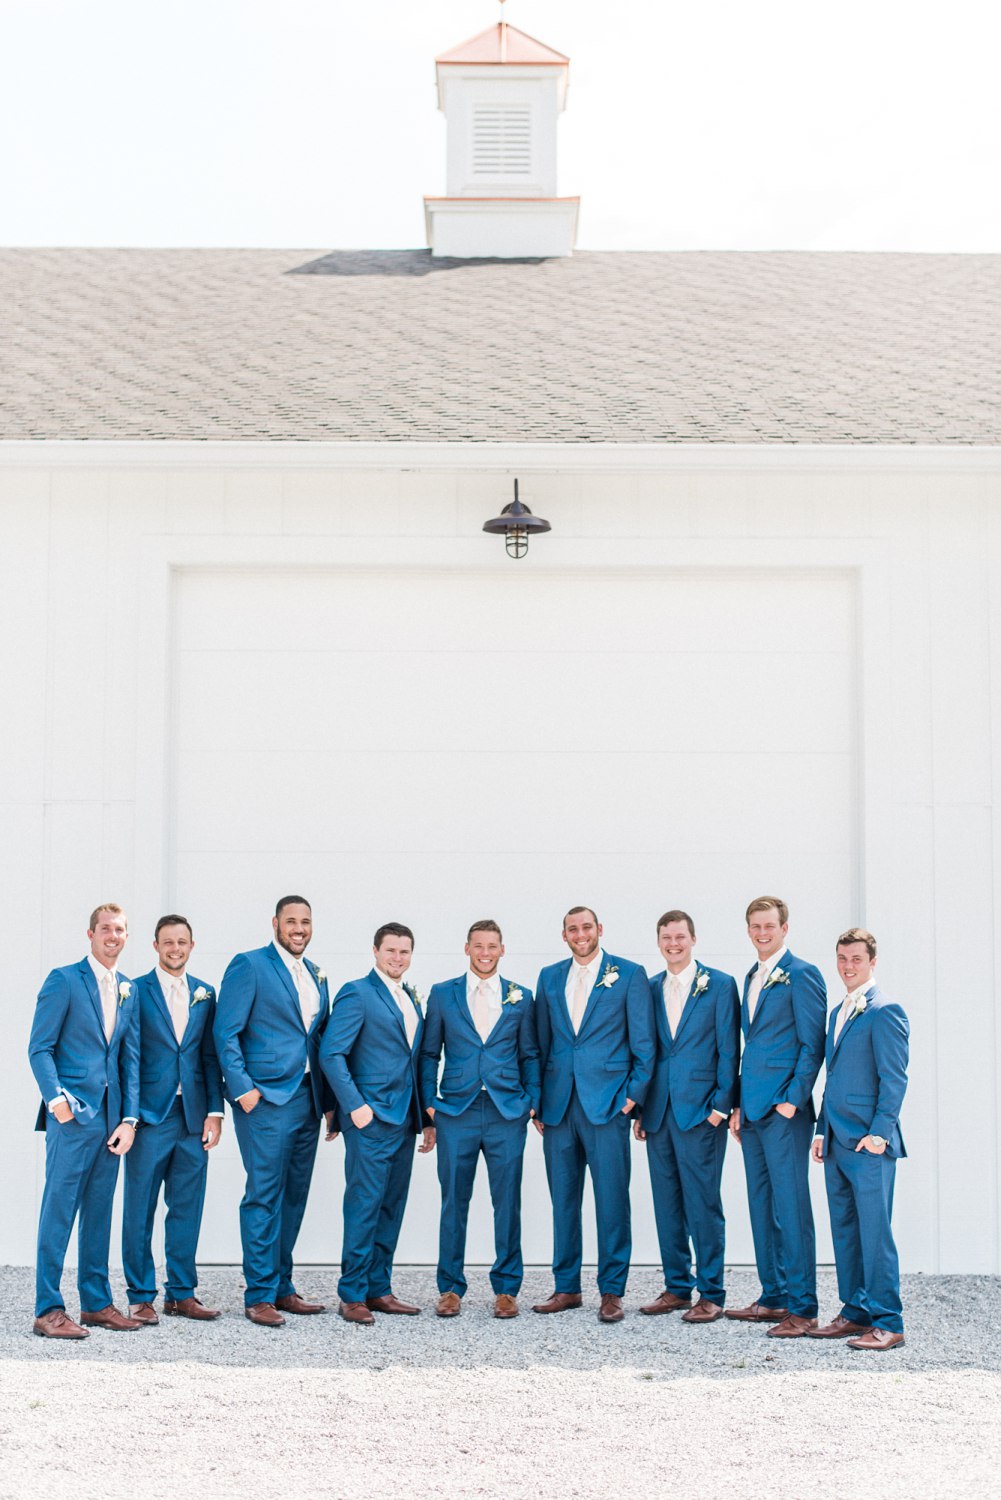 The Carriage House Wedding | Knoxville Wedding Photographer